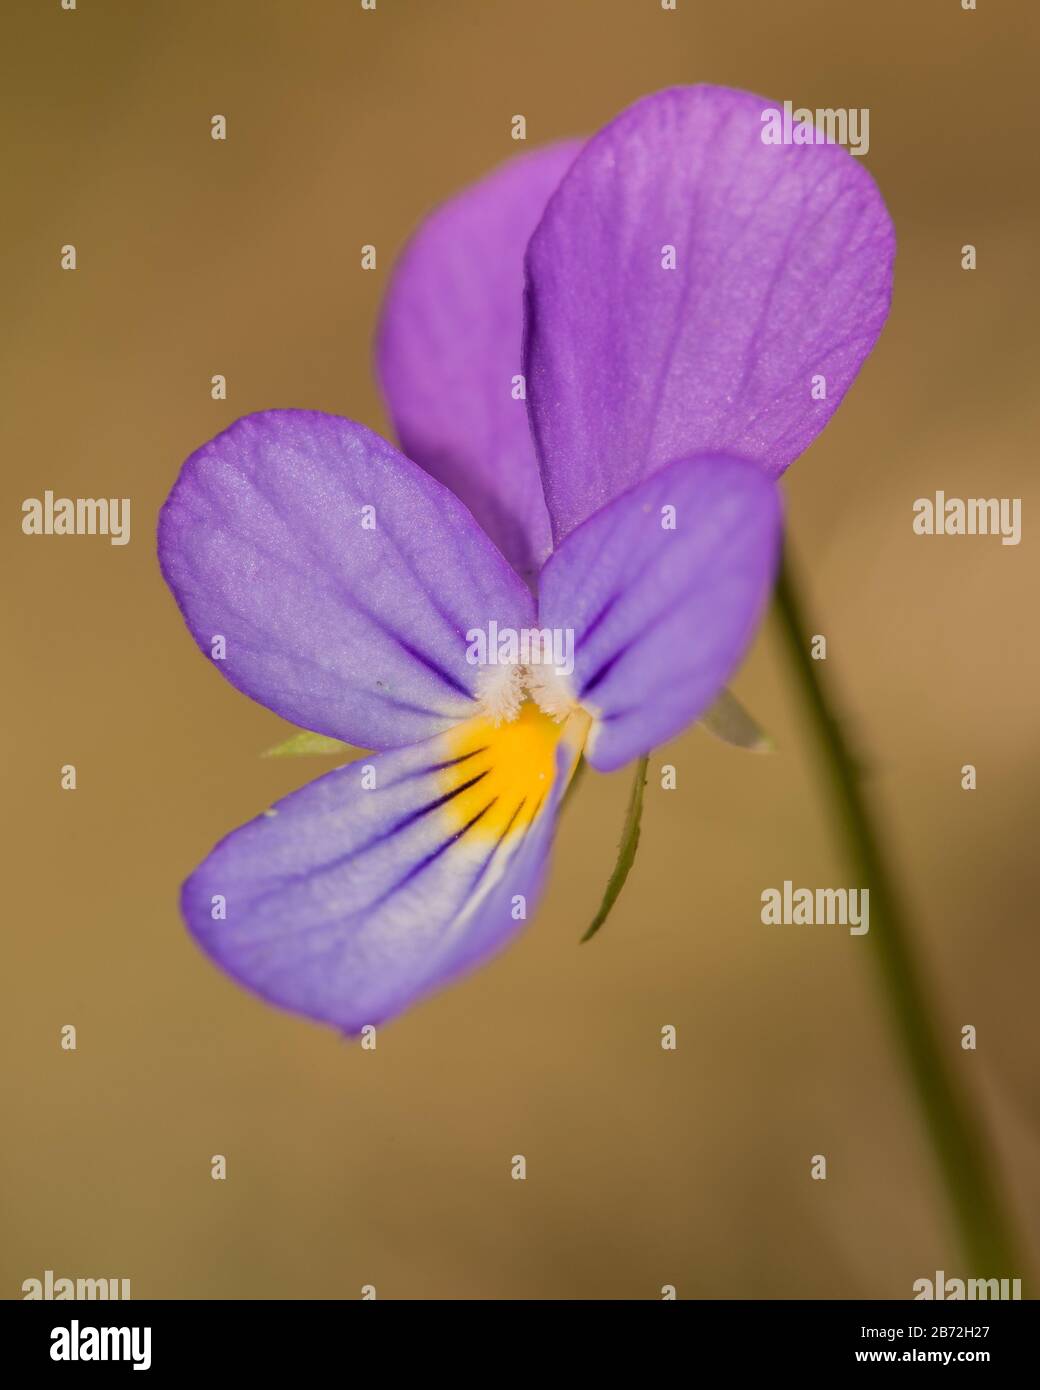 Viola tricolor, auch bekannt als Johnny Jump Up, Heartsease, Heart's Ease, Heart's Delight, Tickle-my-Fancy, Jack-Jump-up-and-Kiss-me, Come-and-Cuddle-me Stockfoto